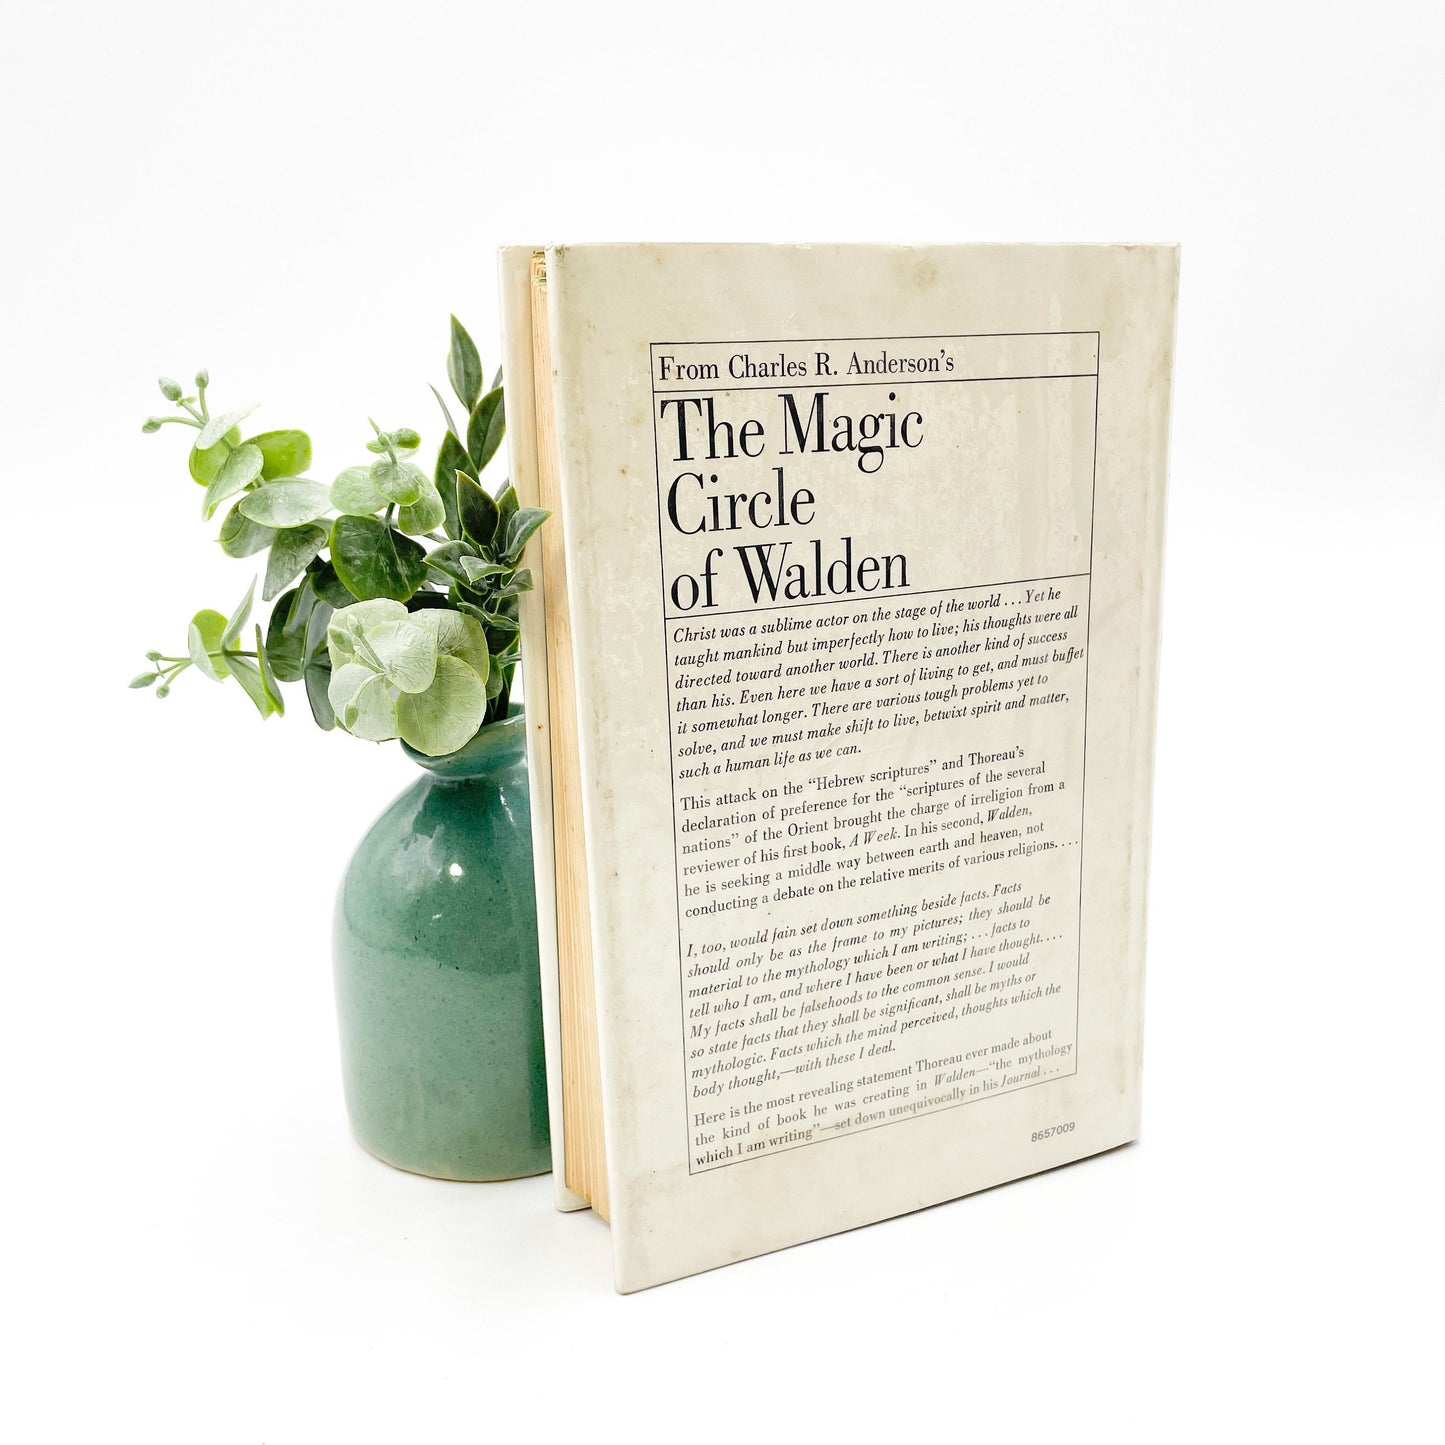 First Edition, The Magic Circle of Walden by Charles R. Anderson